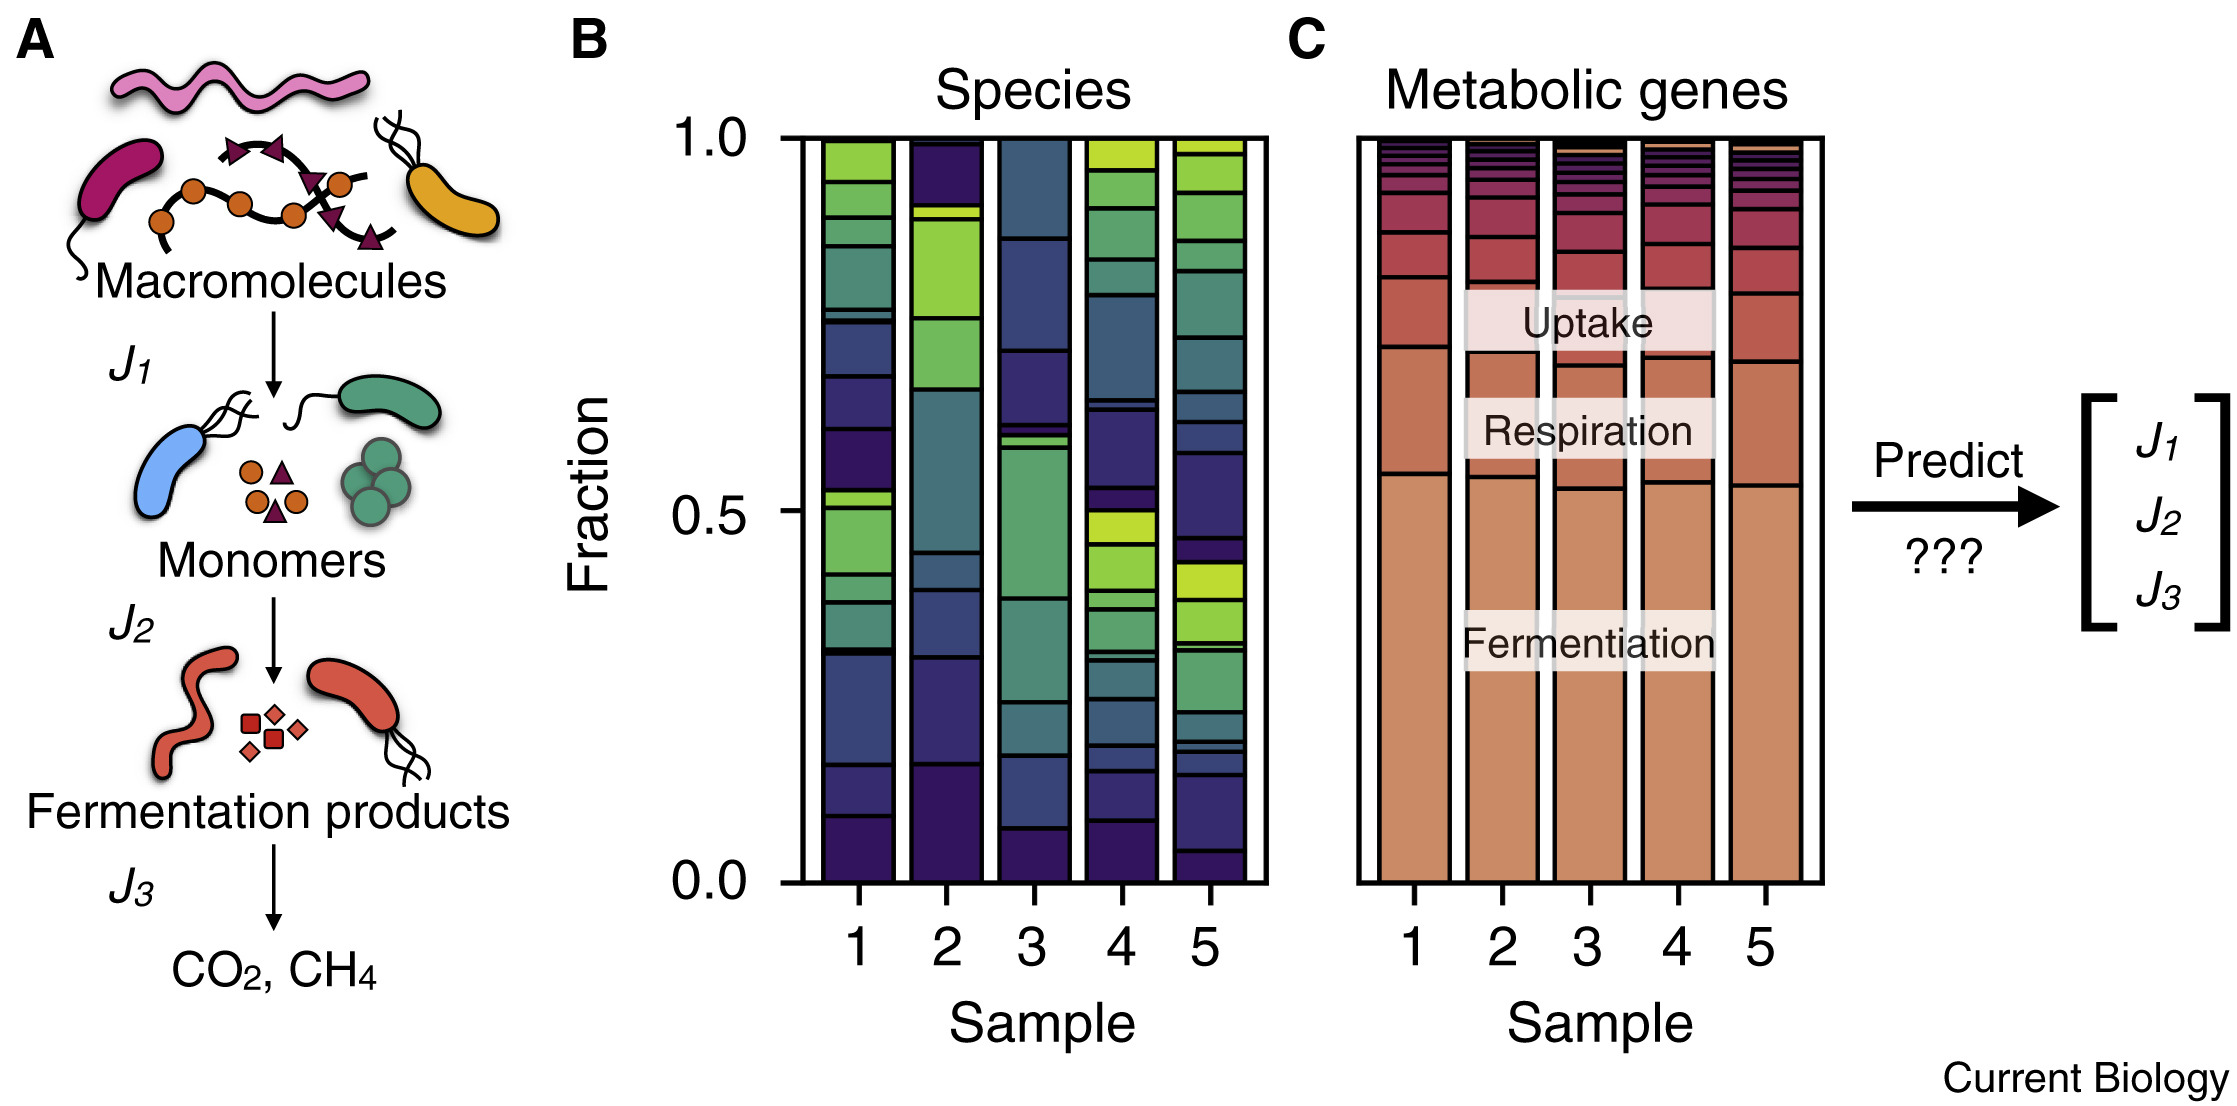 Predicting metabolic rates of microbial communities